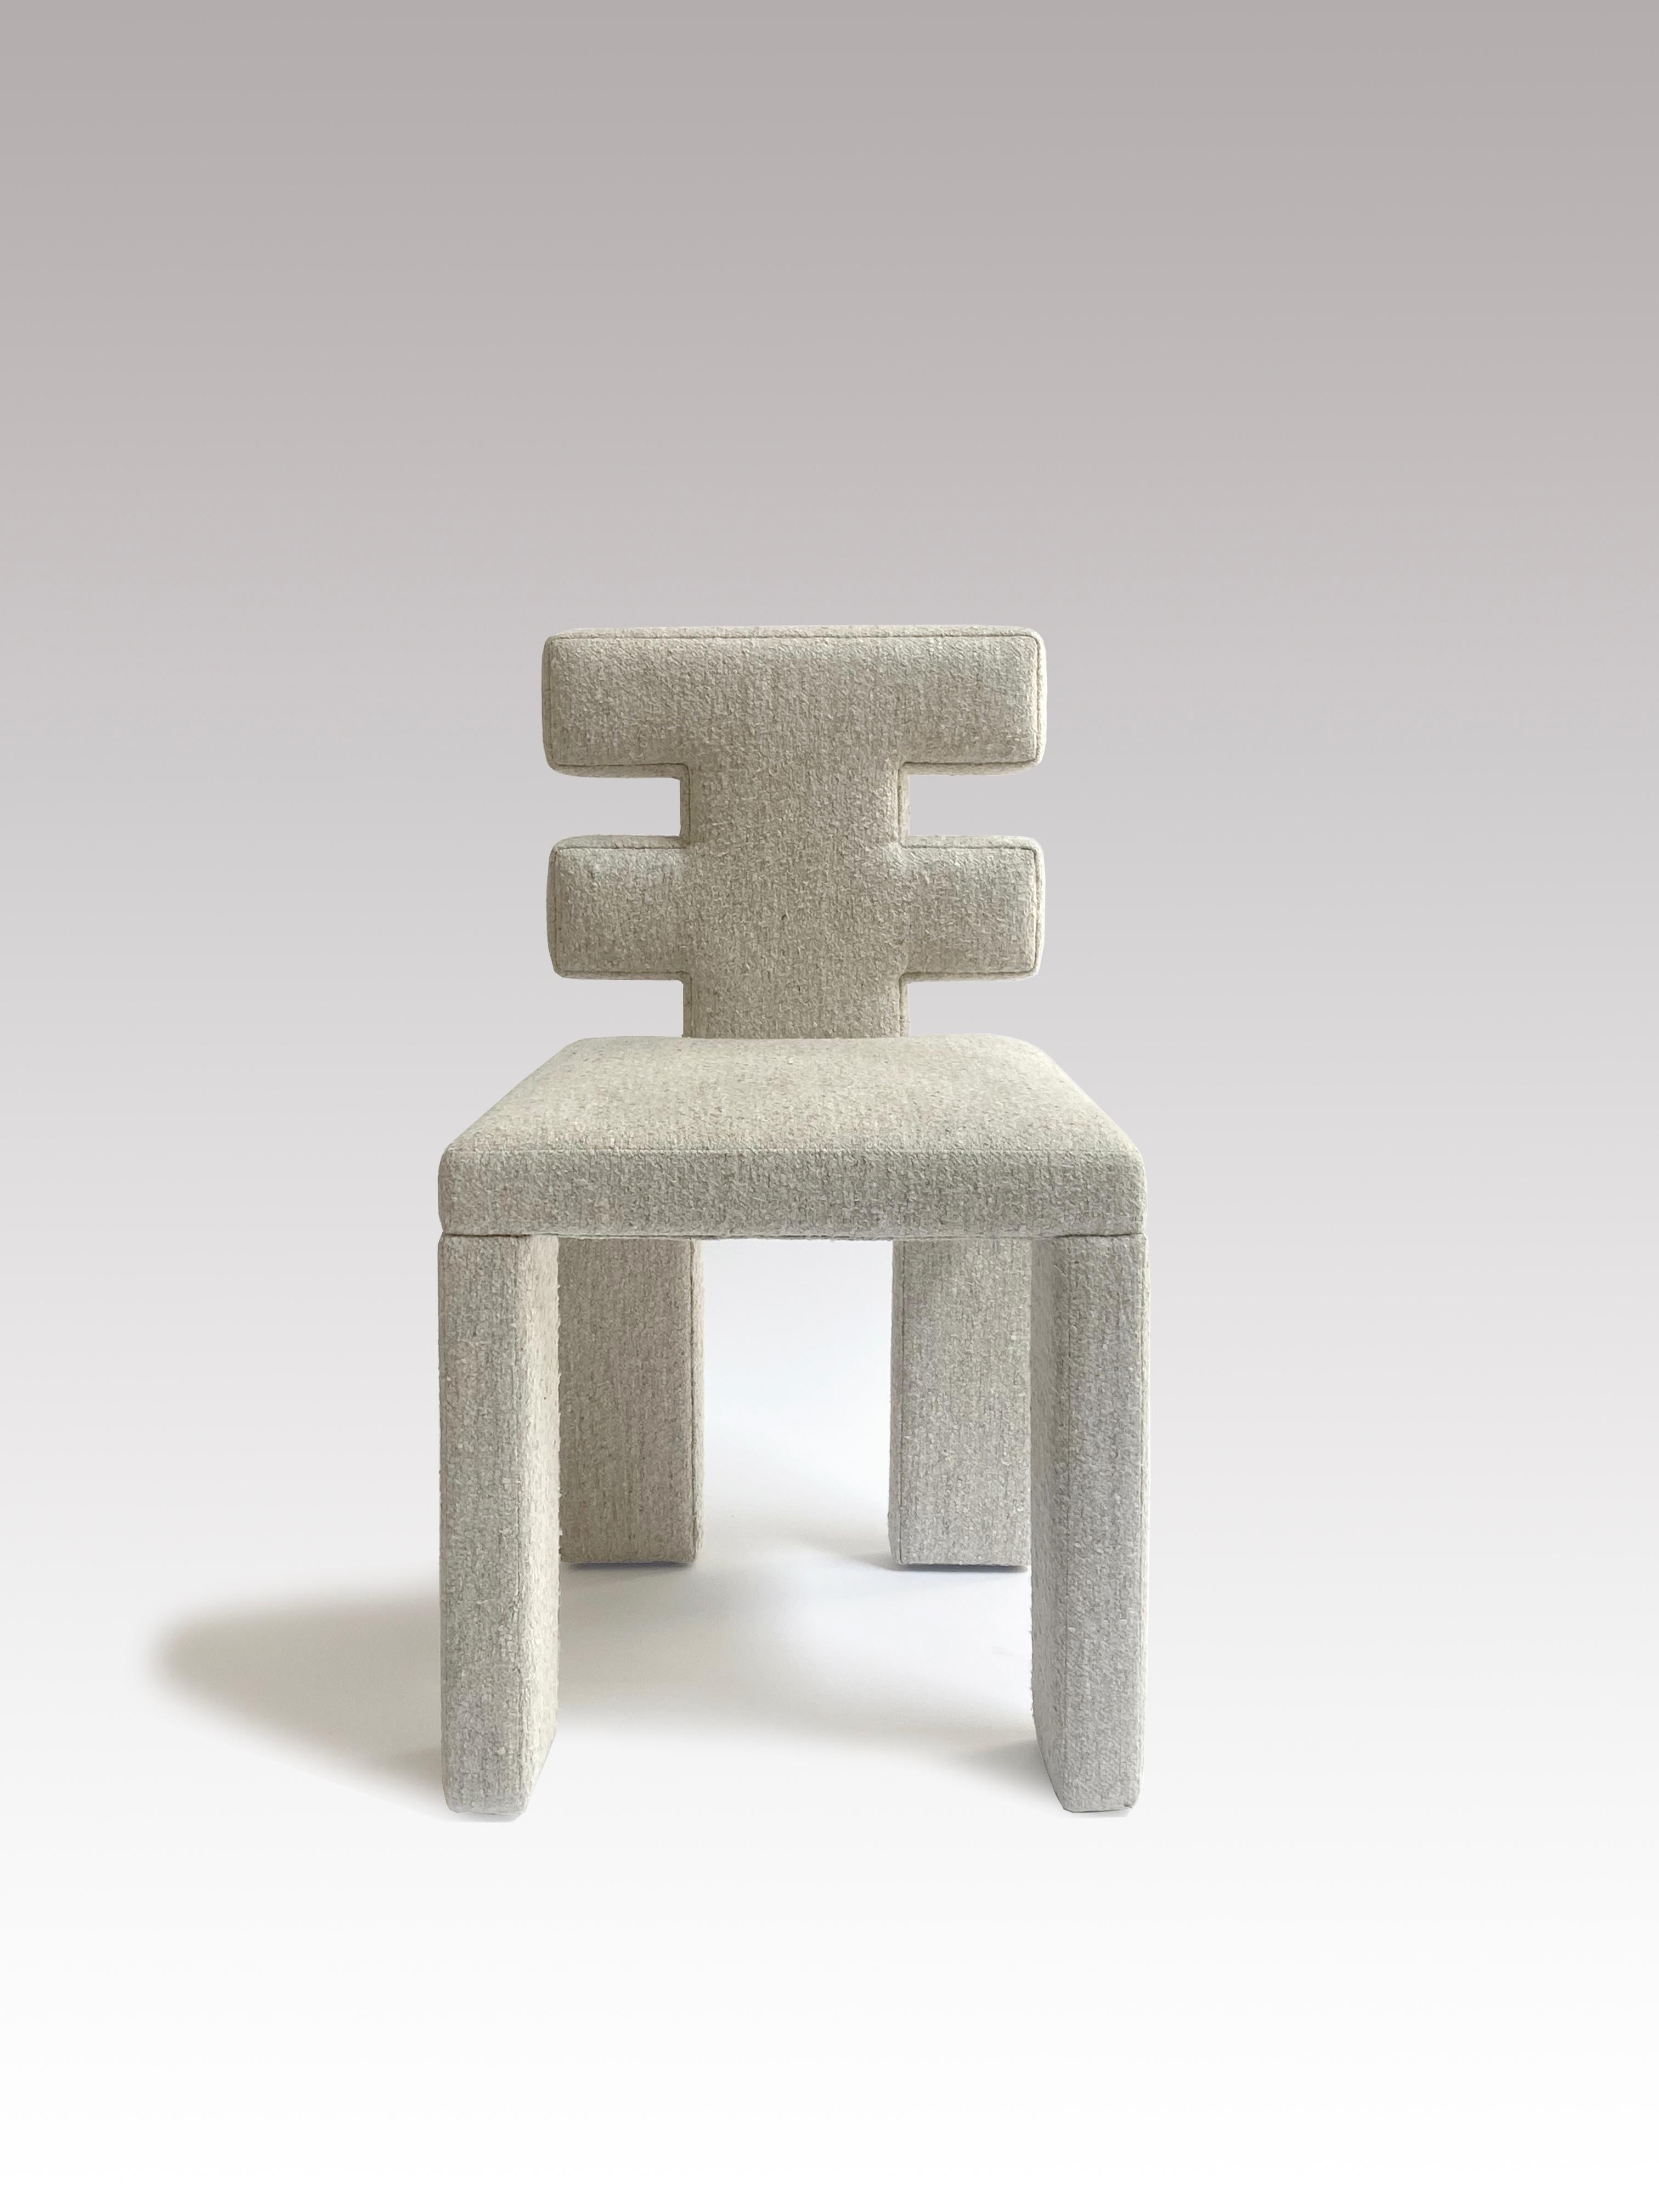 IN STOCK! Our newest Estudio Persona dining chair. A comfortable seat is partnered with a sculptural back and blocky, padded legs. A comforting softness combined with constructivist sturdiness, the H-chair makes a statement.

Upholstered in Wool